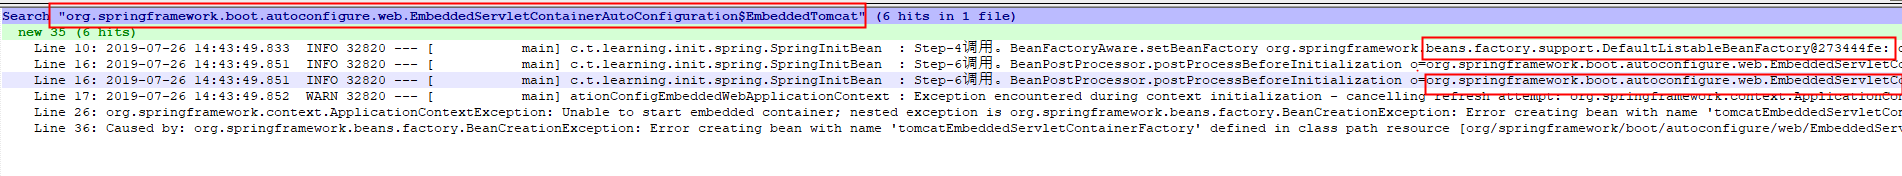 Error creating bean with name 